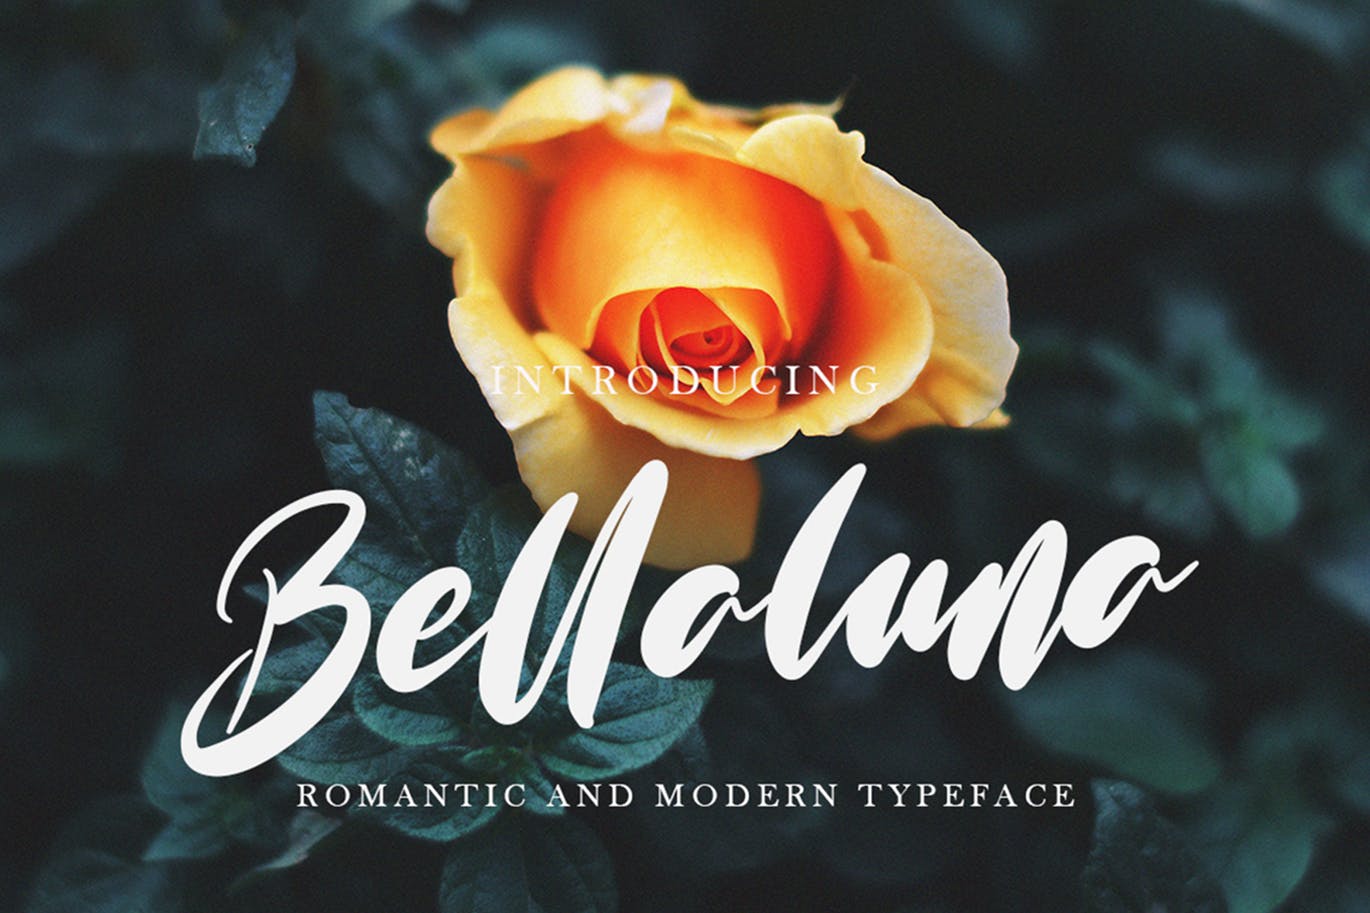 A romantic and modern font